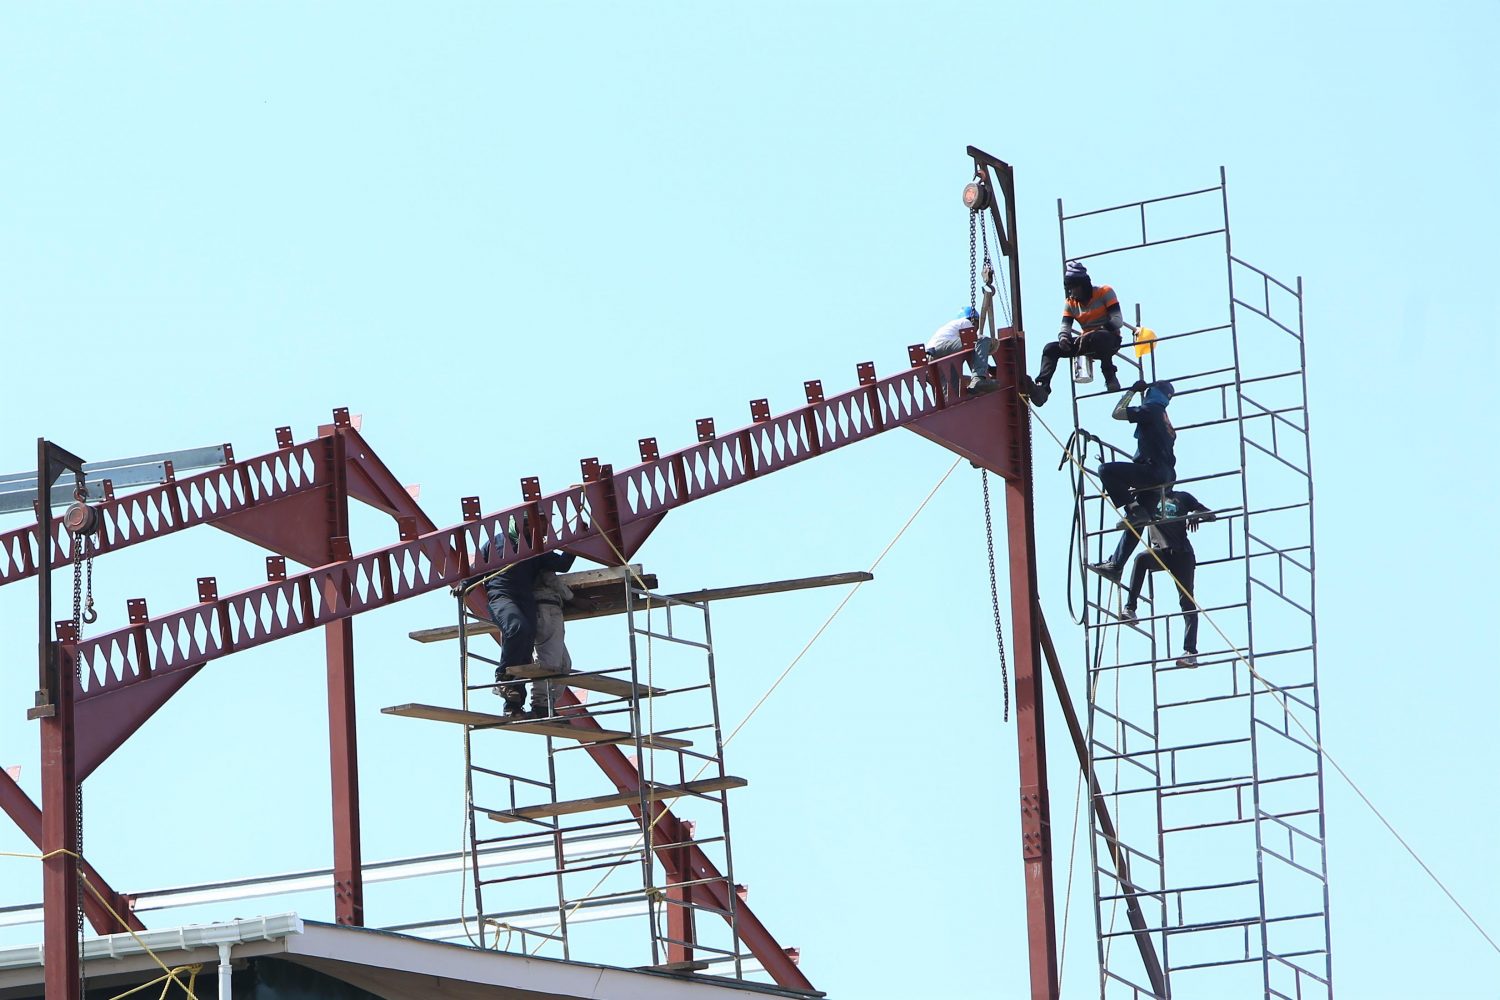 Not safe: While the Guyana Revenue Authority works to make their Camp Street Headquarters safer for their staff, the labourers are functioning in unsafe conditions. In this Keno George photo, workers at the site balance several hundred feet in the air without safety harnesses or any other visible form of safety gear.